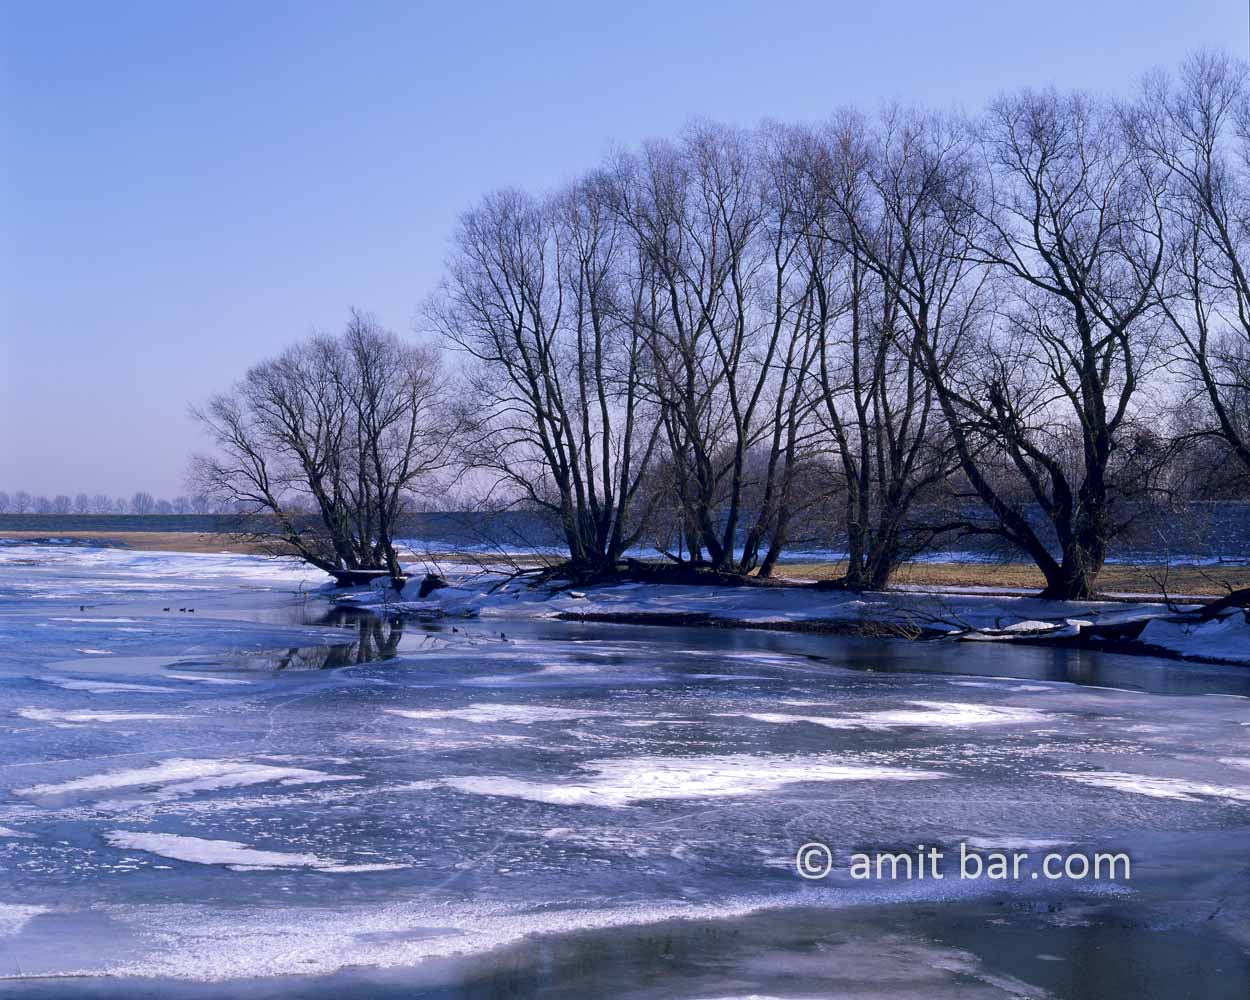 Ice and trees: Trees standing in icy pool at De Griet, Doesburg